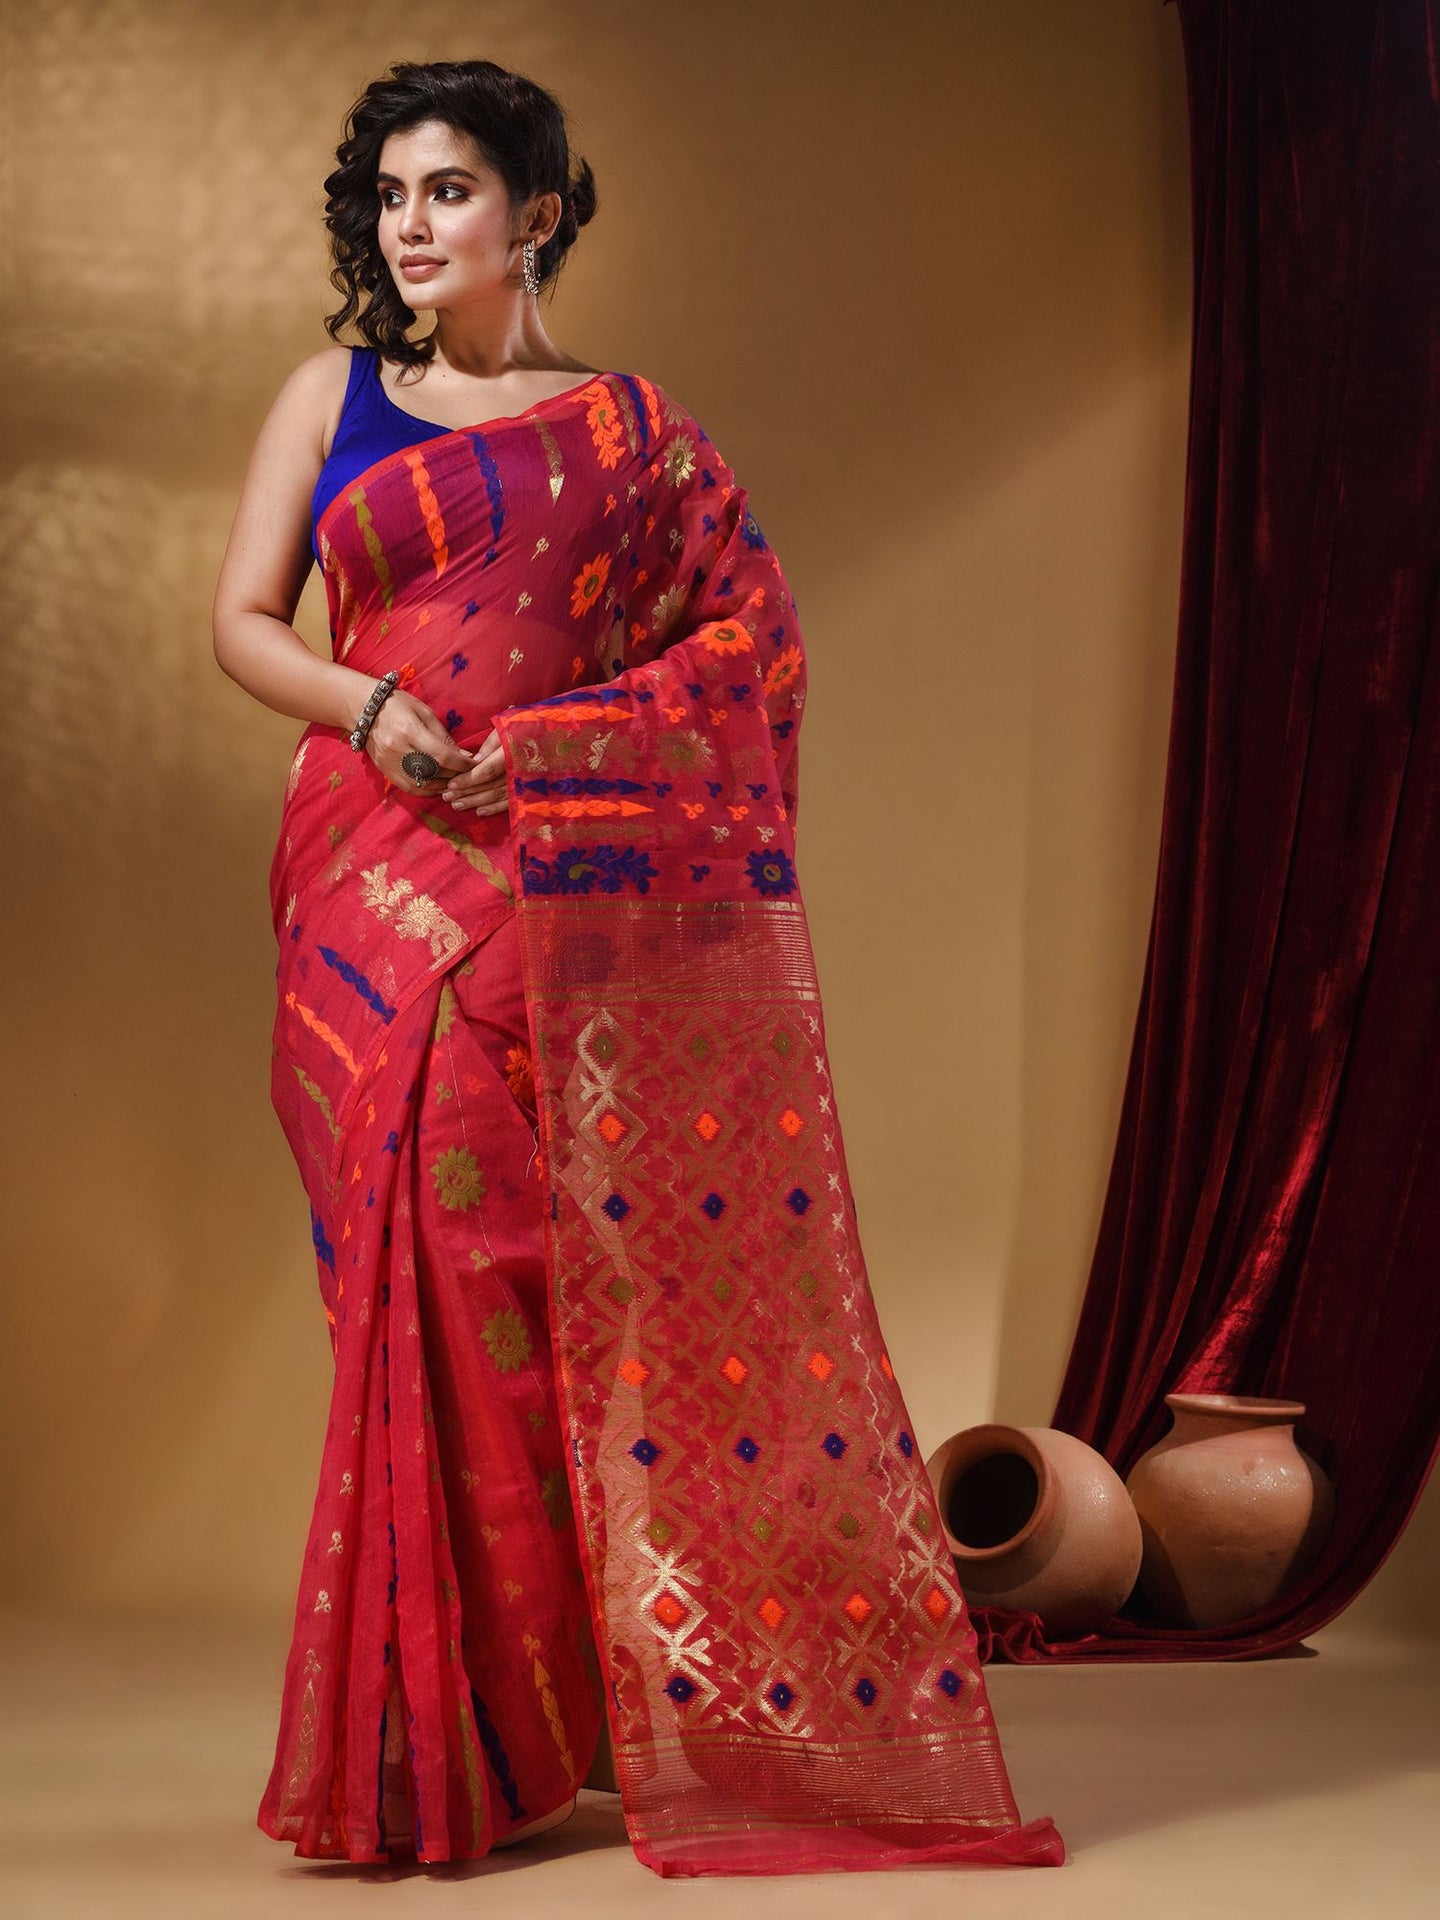 Pink Cotton Handwoven Jamdani Saree With Multicolor Floral Designs And Motifs